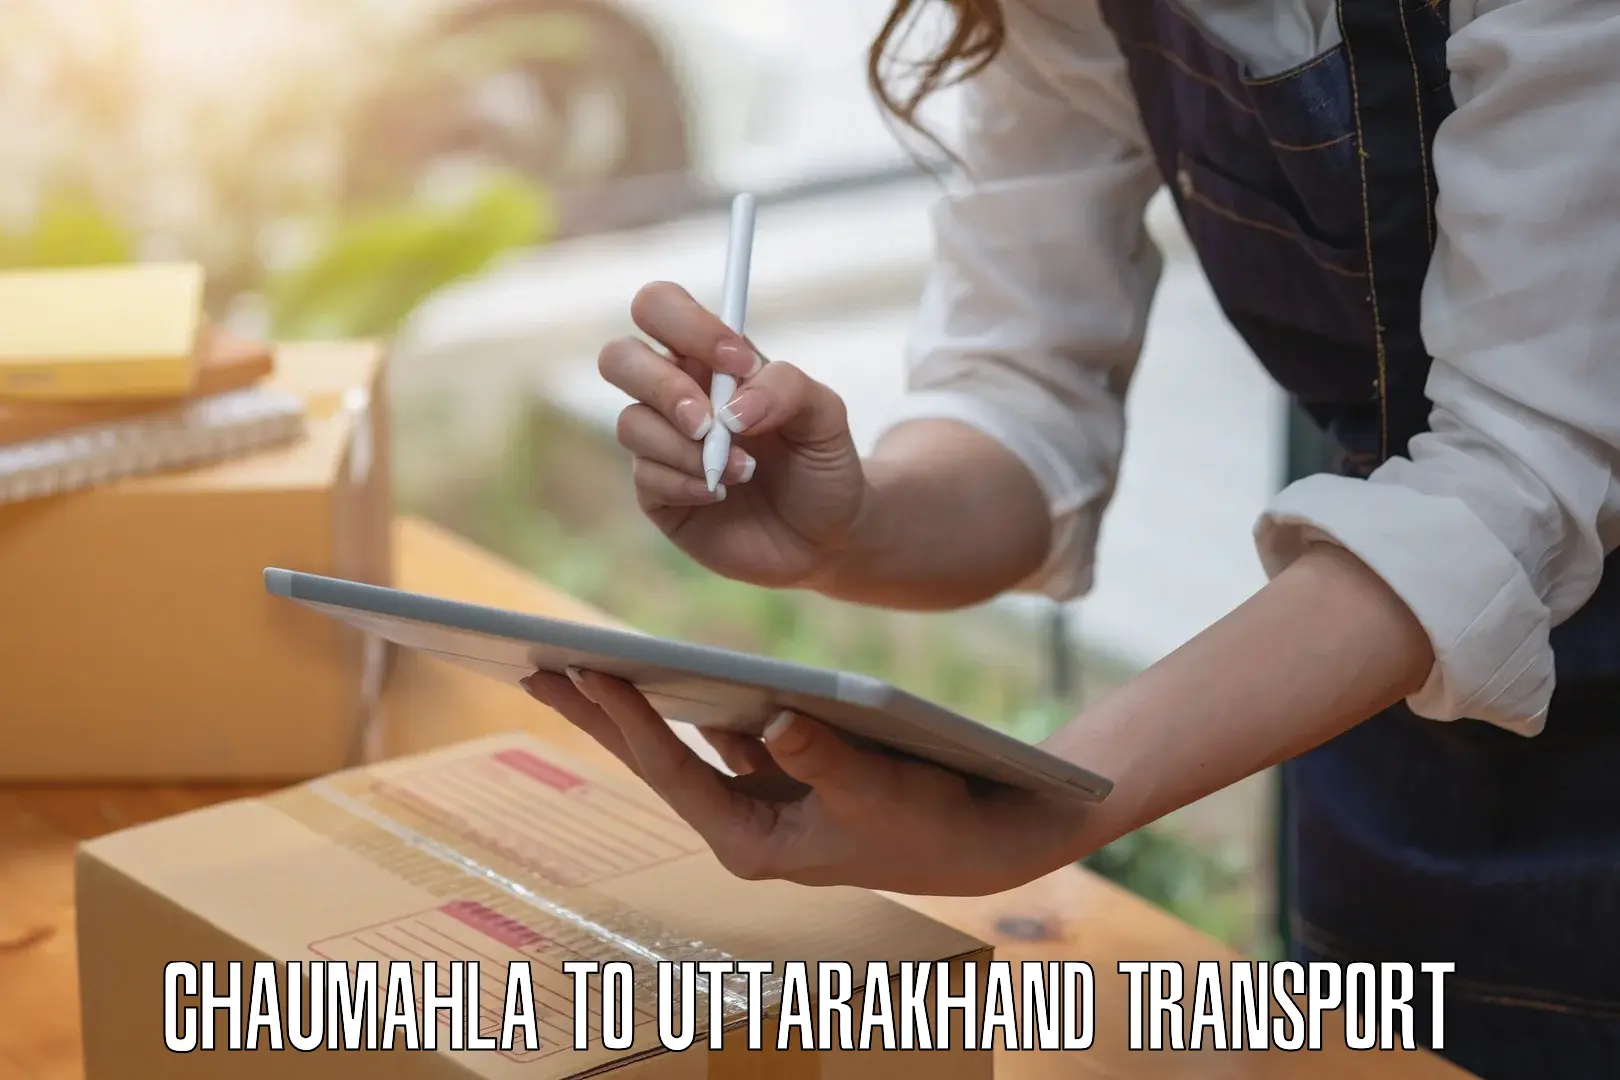 Air freight transport services Chaumahla to Uttarakhand